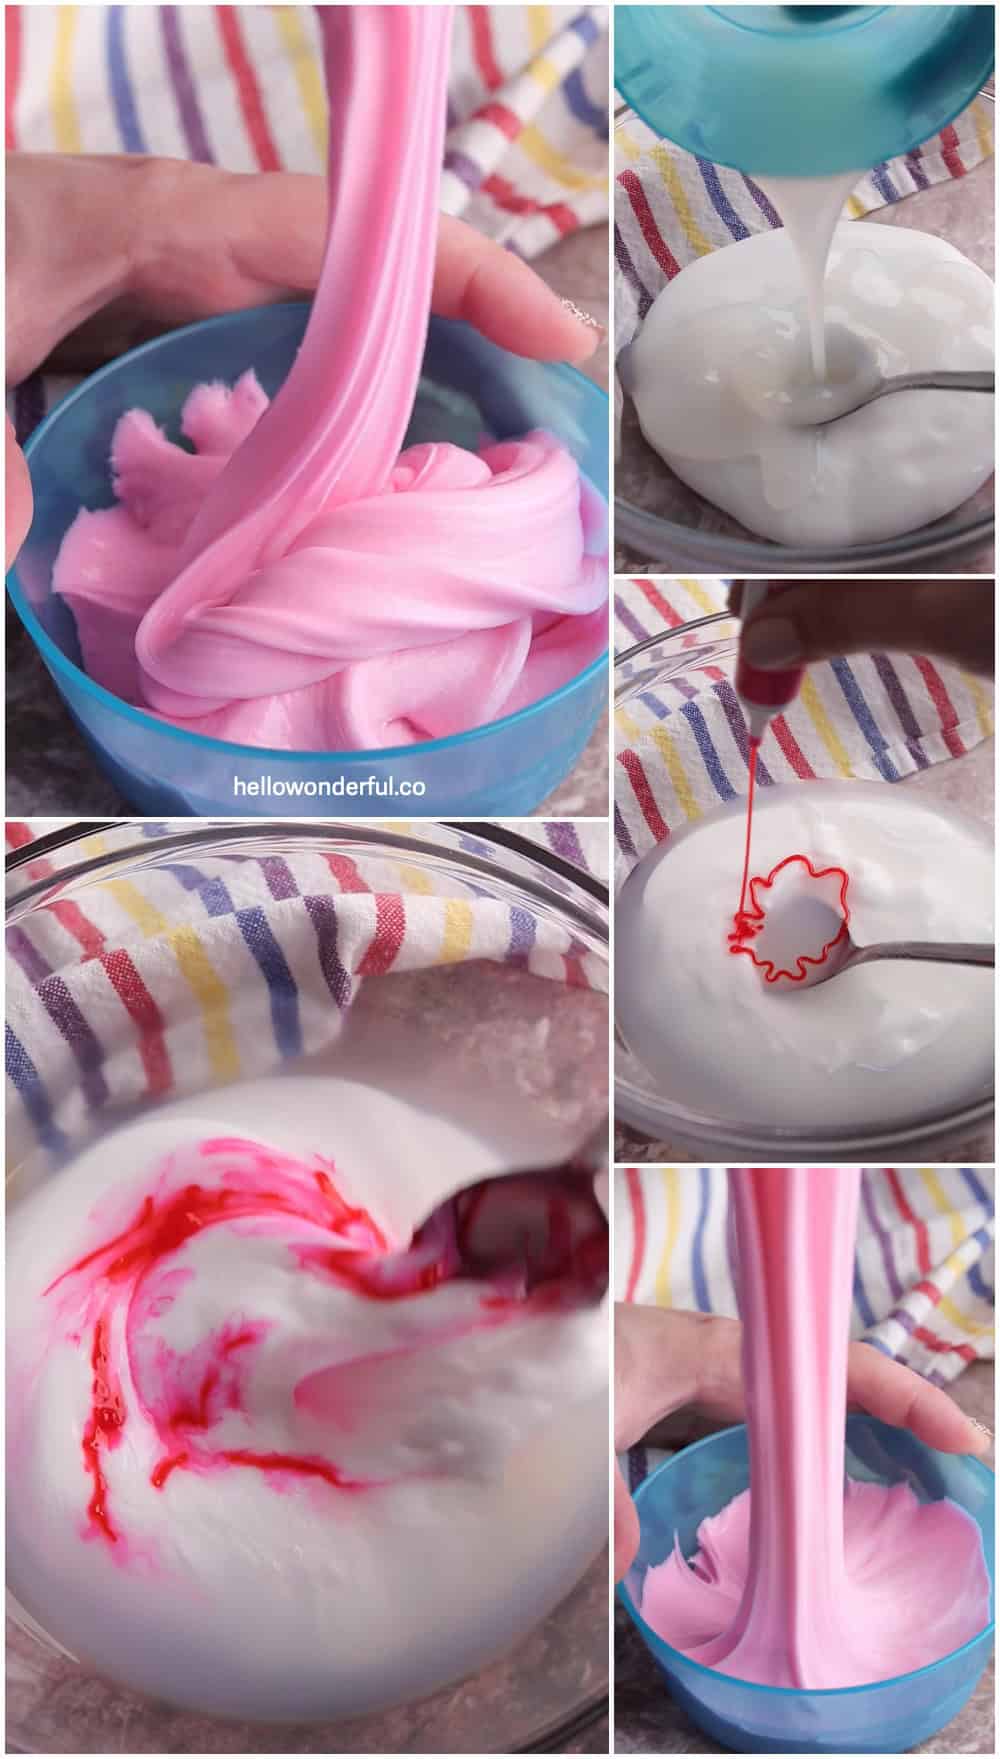 2 Ingredients Slime Sensory Recipe (Homemade Silly Putty)